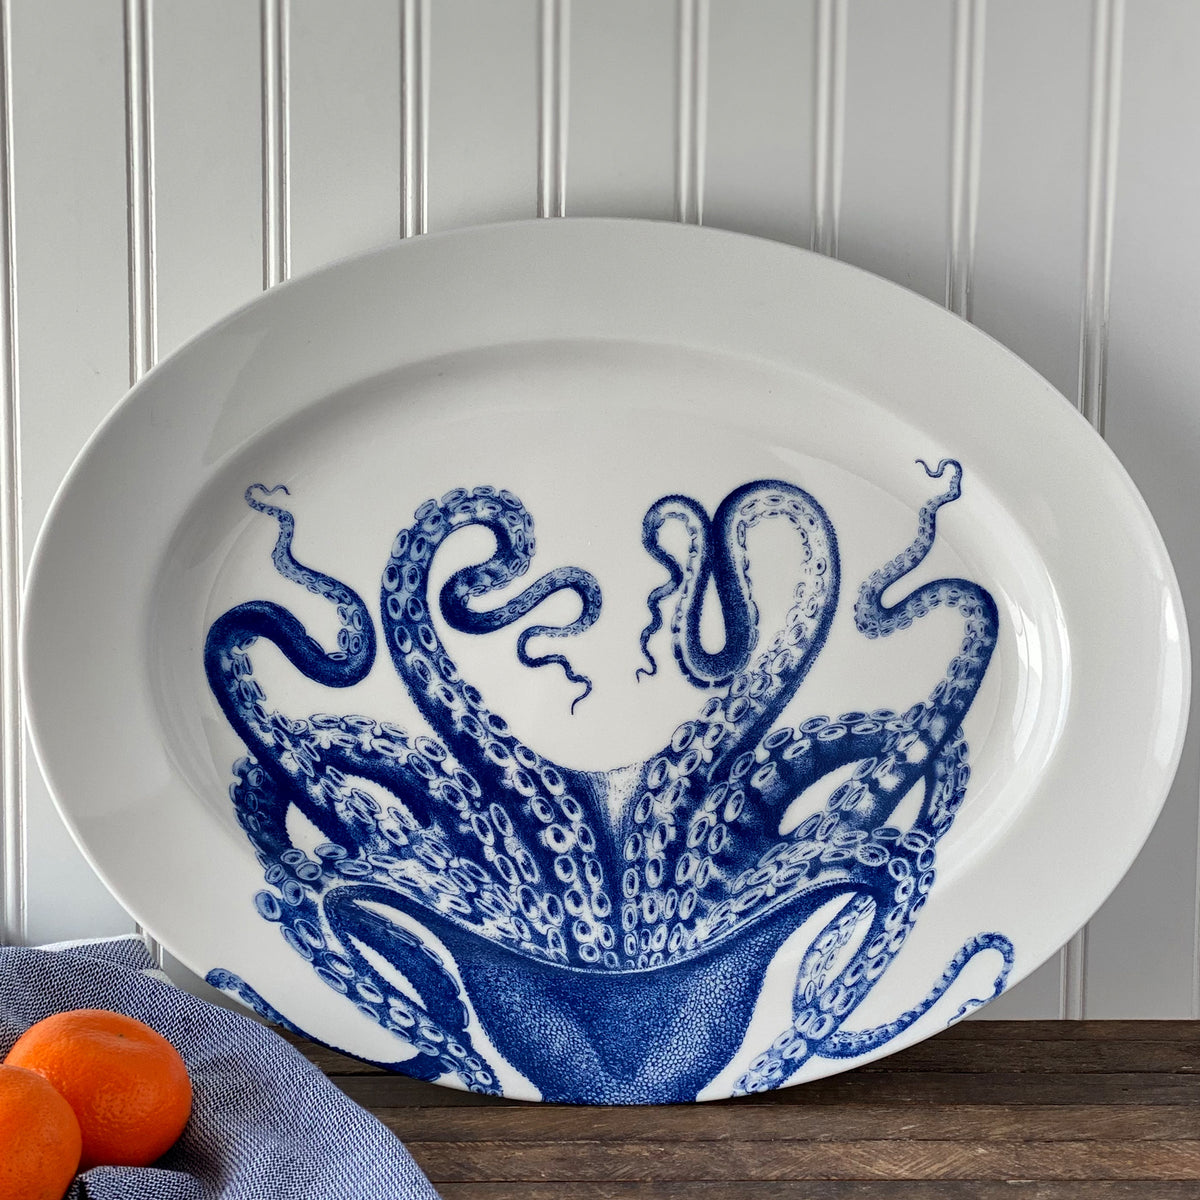 Lucy Oval Rimmed Platter by Caskata Artisanal Home featuring a blue octopus design. The platter is placed on a wooden surface with two small oranges and a blue cloth to the left. Background has white vertical wall panels.